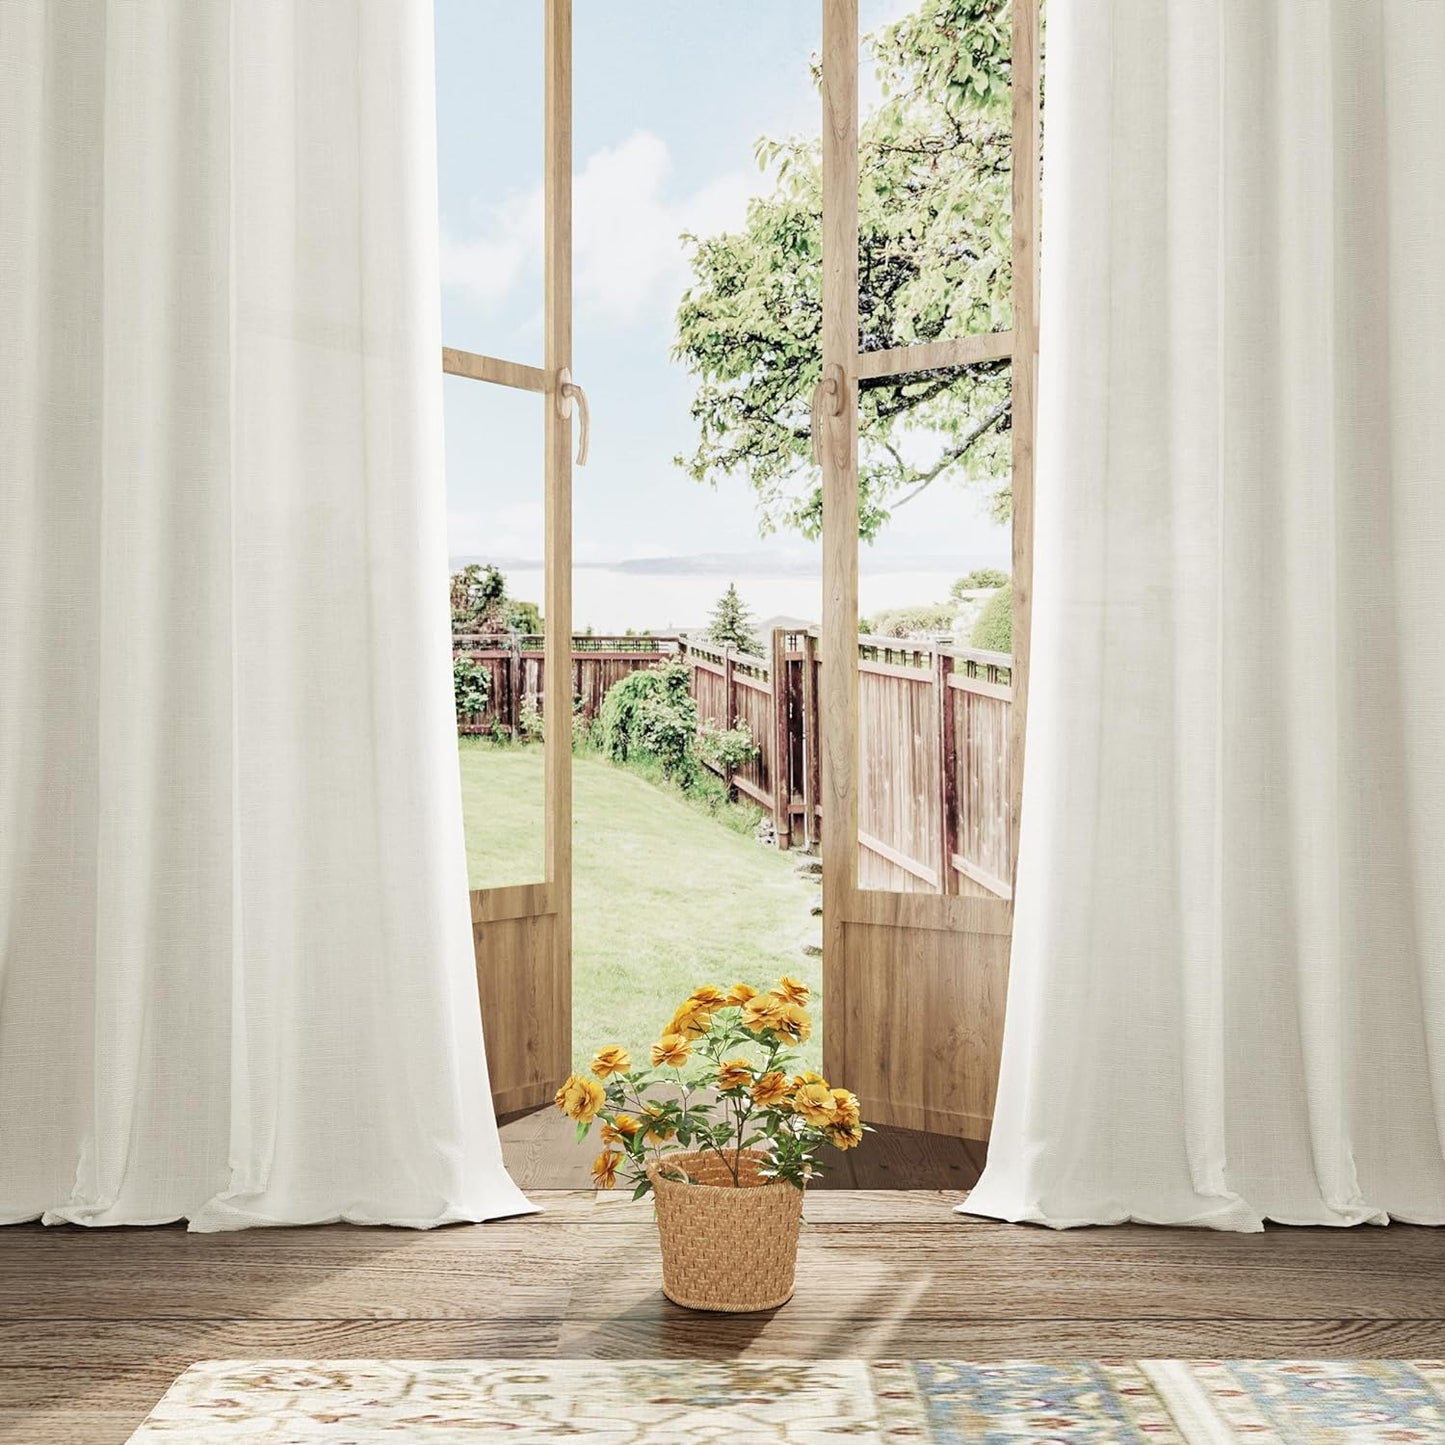 132 Inch Linen Curtains for High Ceiling Living Room Back Tab Hooks Pinch Pleat Custom Made Drape Semi Sheer Extra Long Curtain 132 Inches Long for 2 Story Windows Sliding Door Cream Ivory Birch  Aersas   